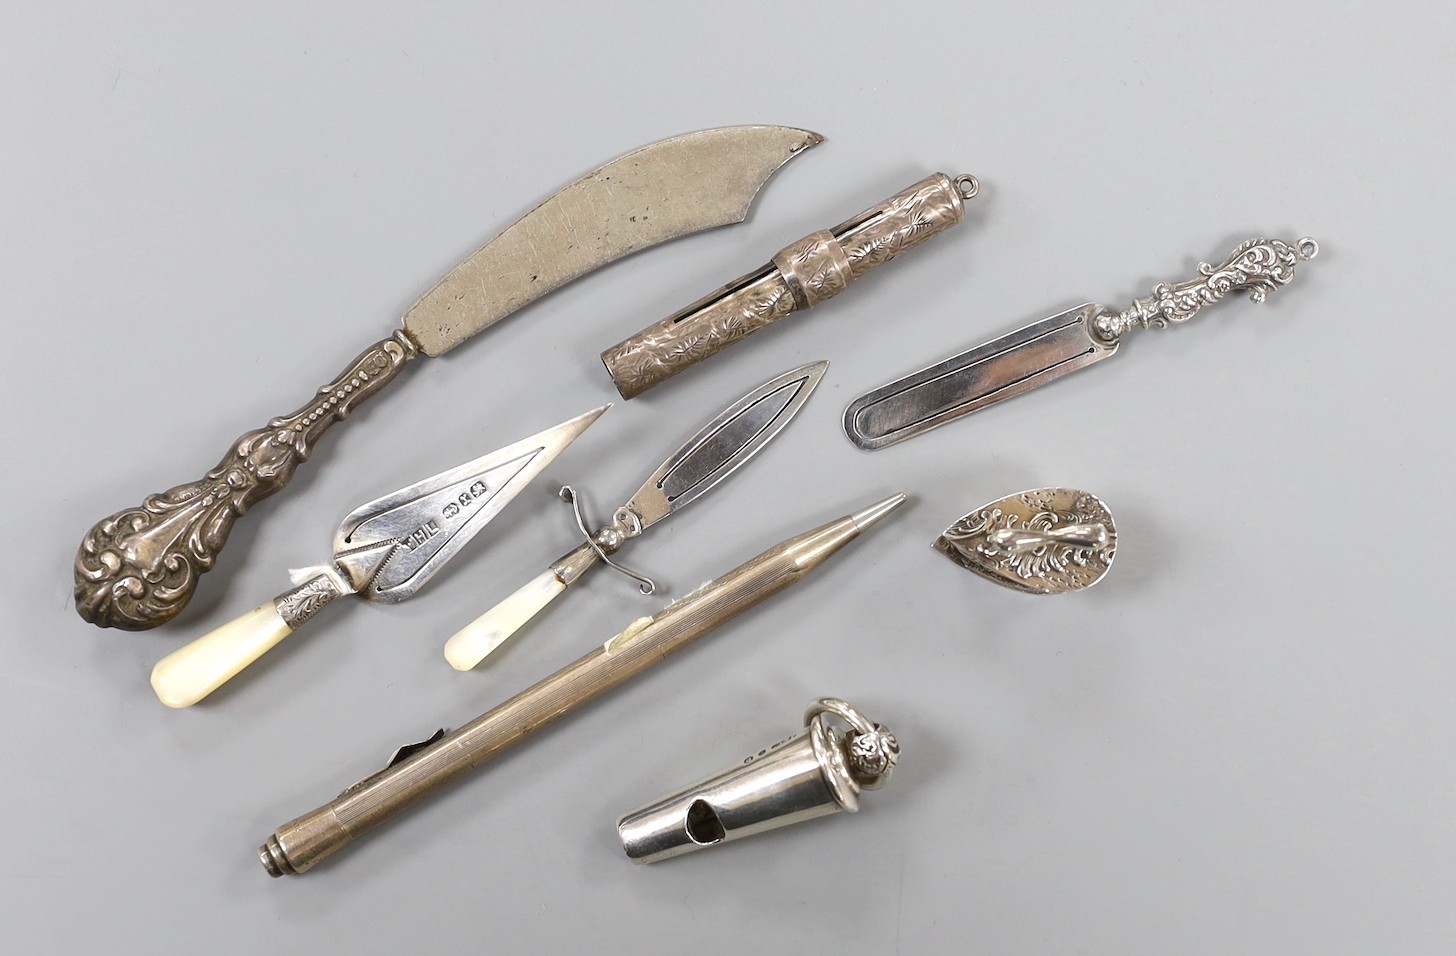 Collectable small silver including a Victorian silver whistle, London, 1859 (lacking outer case), three silver bookmarks, including trowel and dagger, a sterling pen, pencil case(no lead), silver handled scimitar paper k